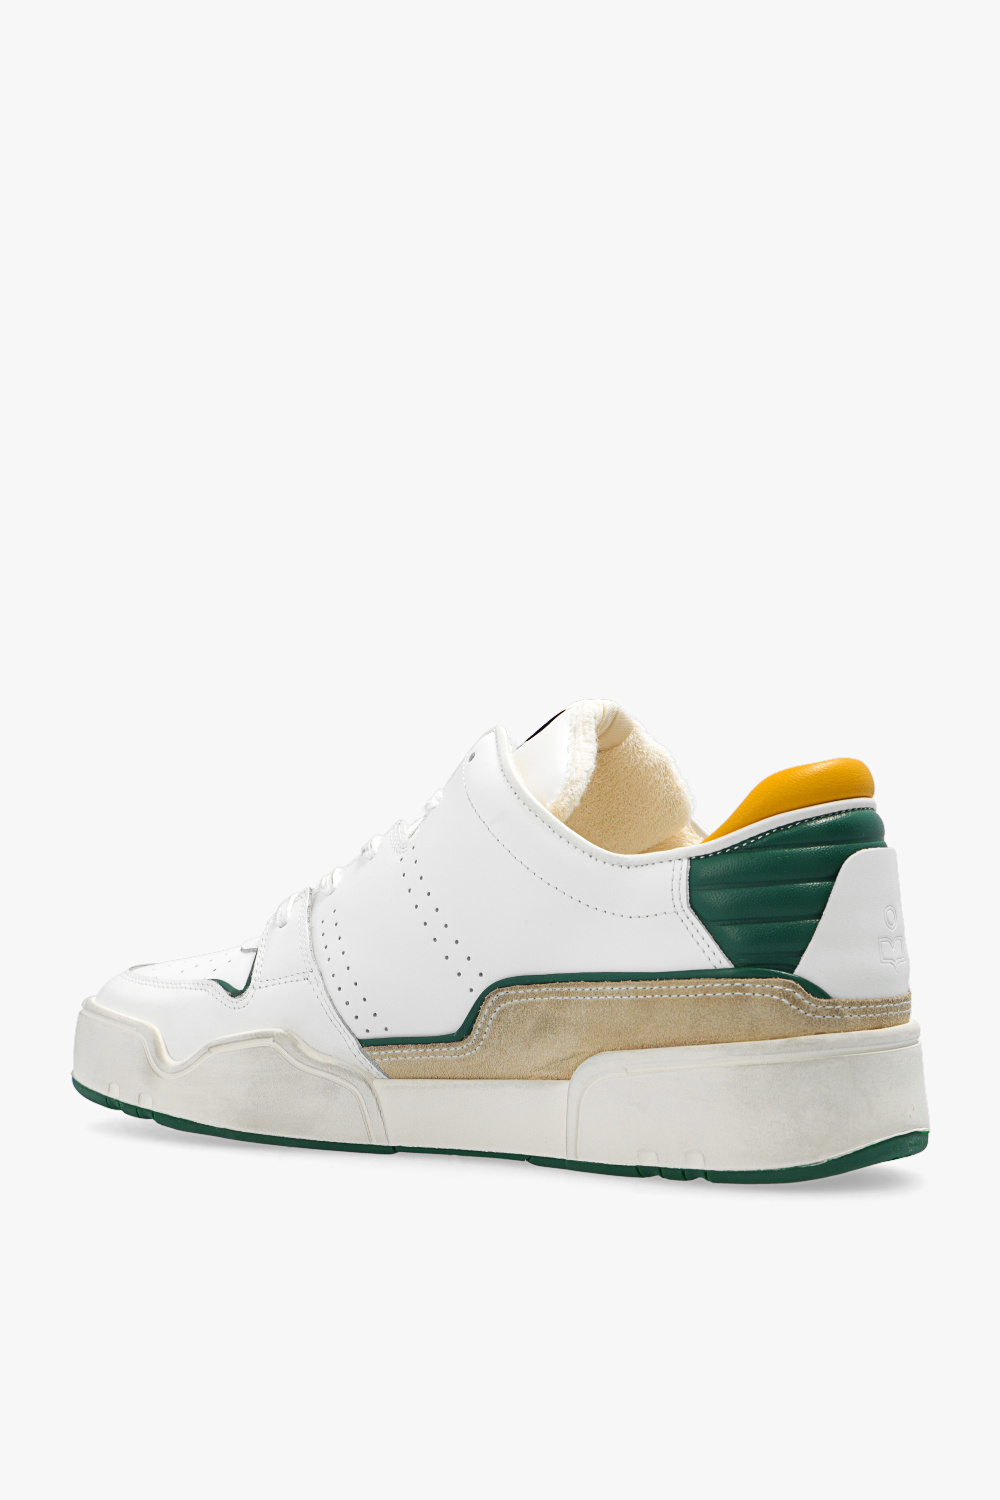 Isabel Marant ‘Emereeh’ sneakers